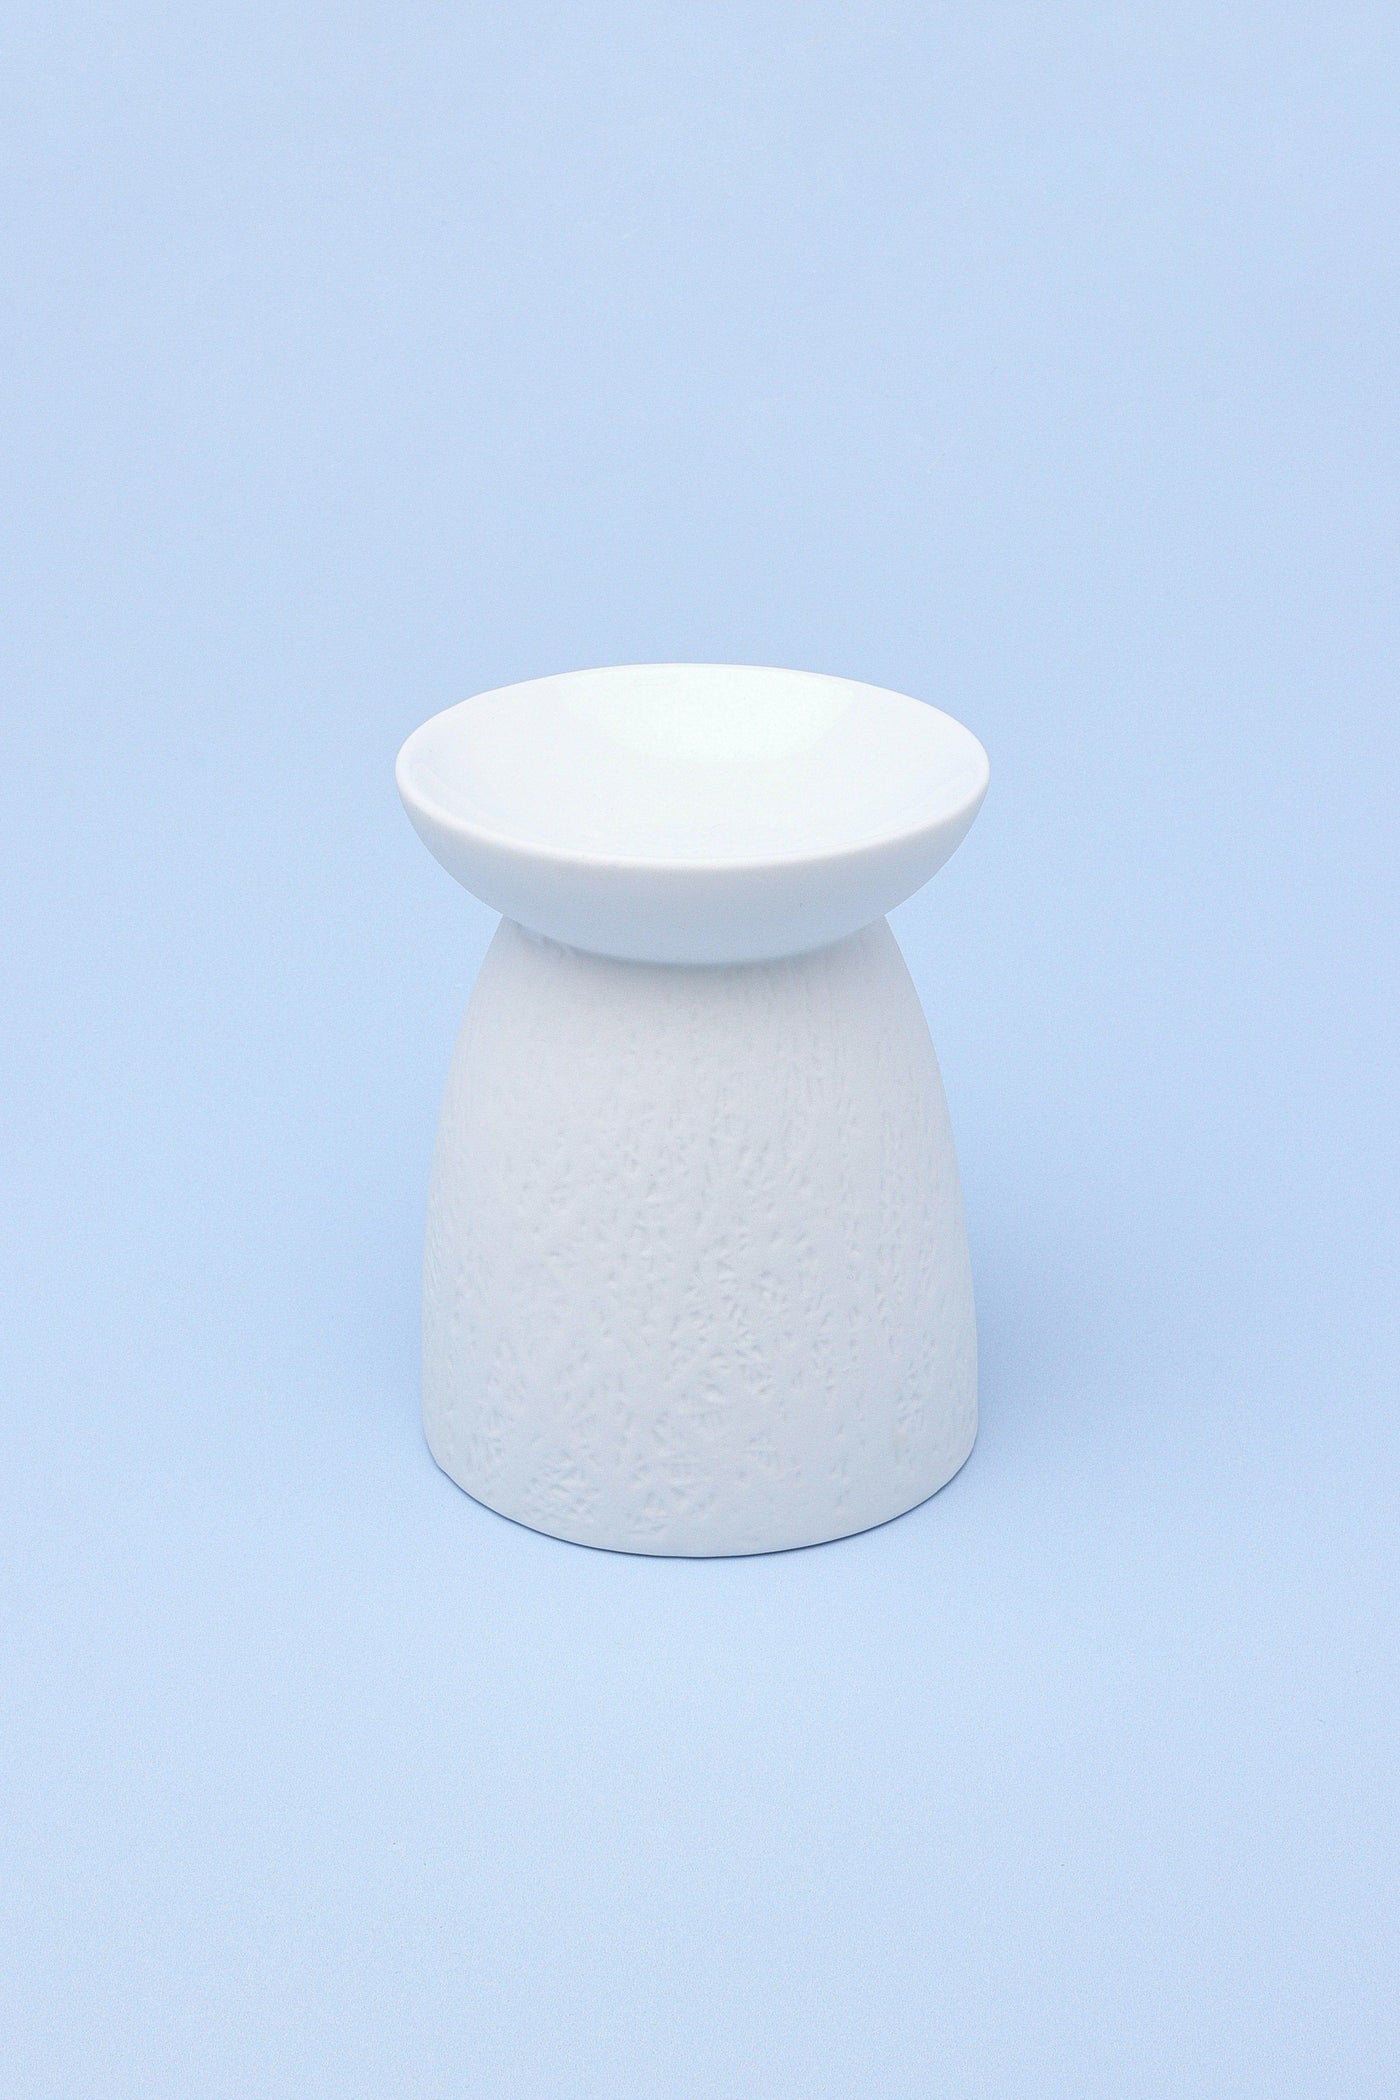 G Decor Candles & Candle Holders White Desire Aroma White Ceramic Wax Melt Oil Warmer Diffuser, Home Scenting